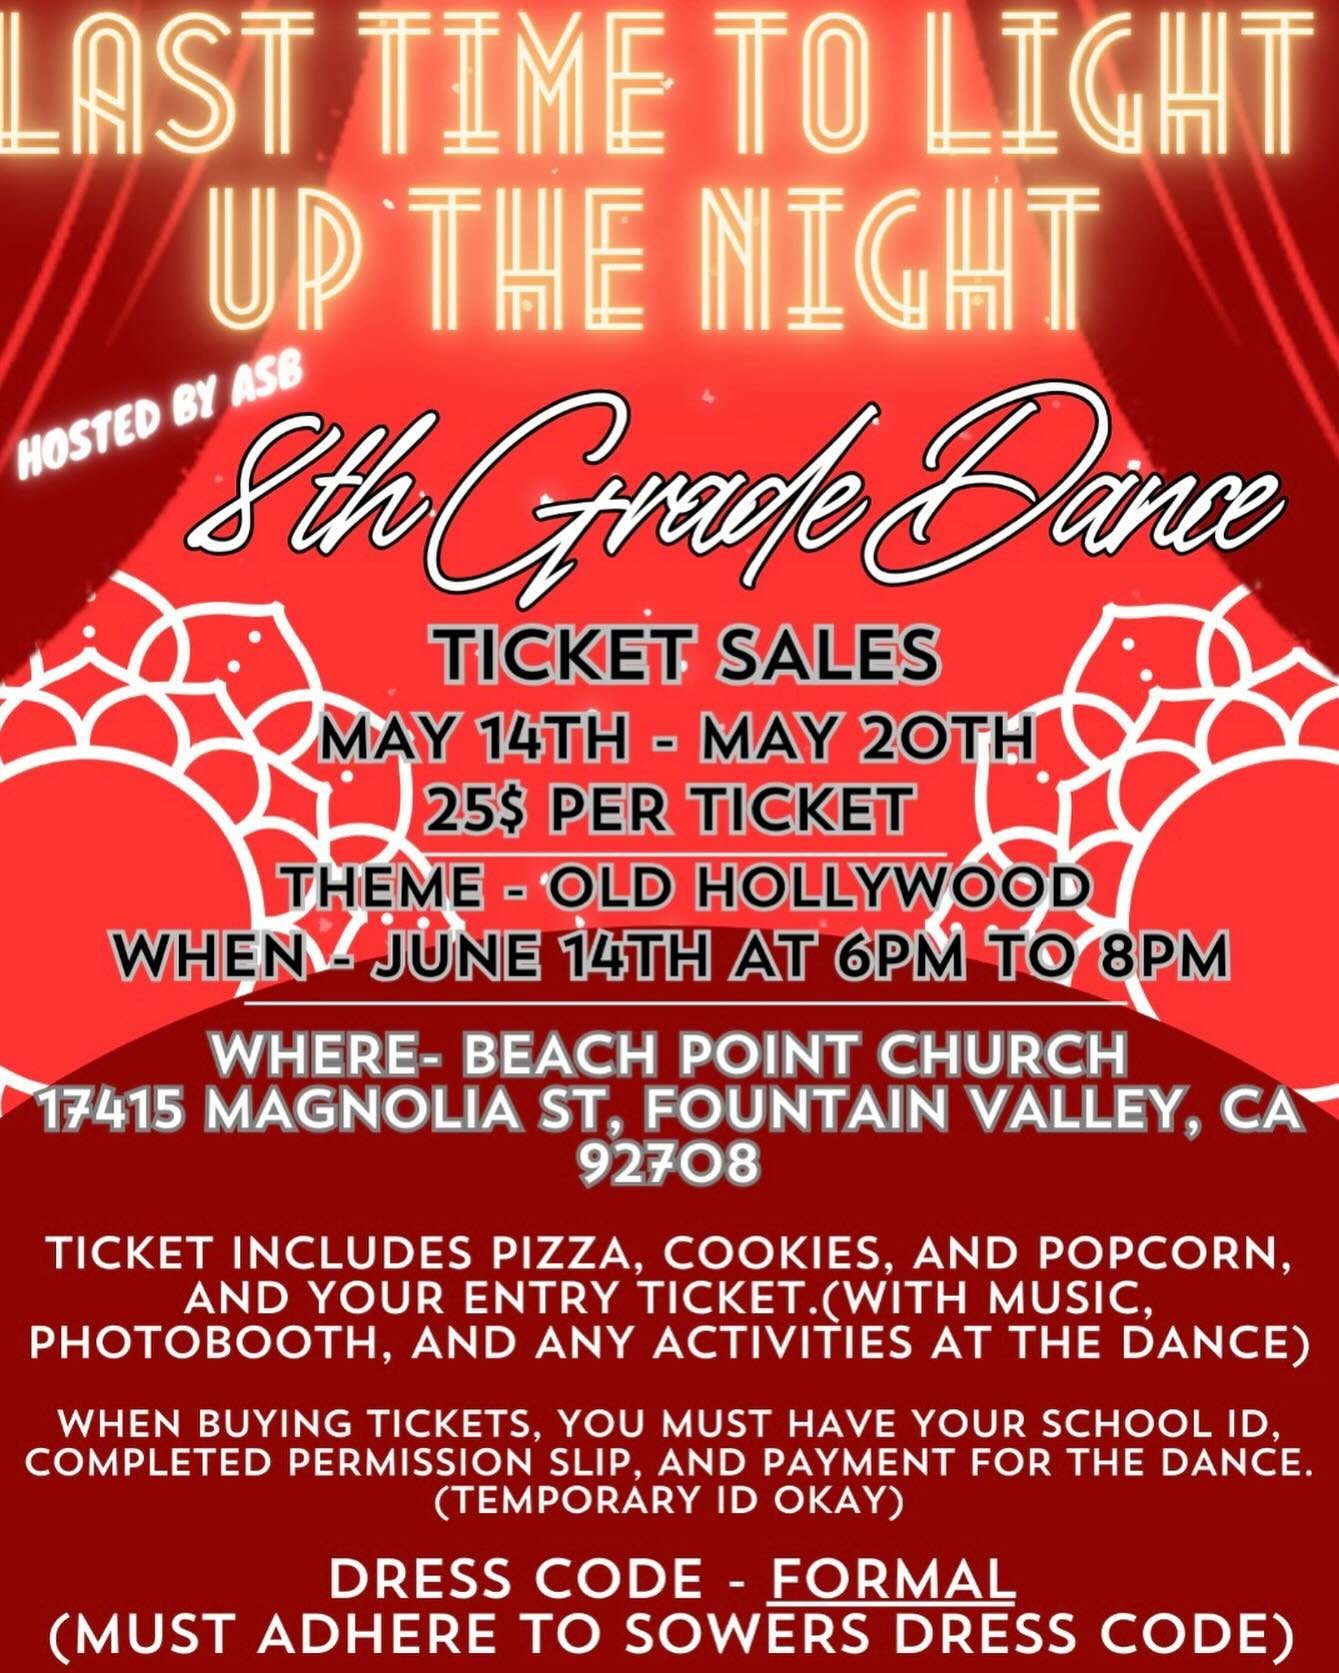 Attention 8th Graders!! Ticket sales start tomorrow for the 8TH GRADE DANCE!! Tickets cost $25 and will be sold during the 8th grade lunch starting tomorrow until May 20th. Be sure to have your school ID and completed permission slip when purchasing 